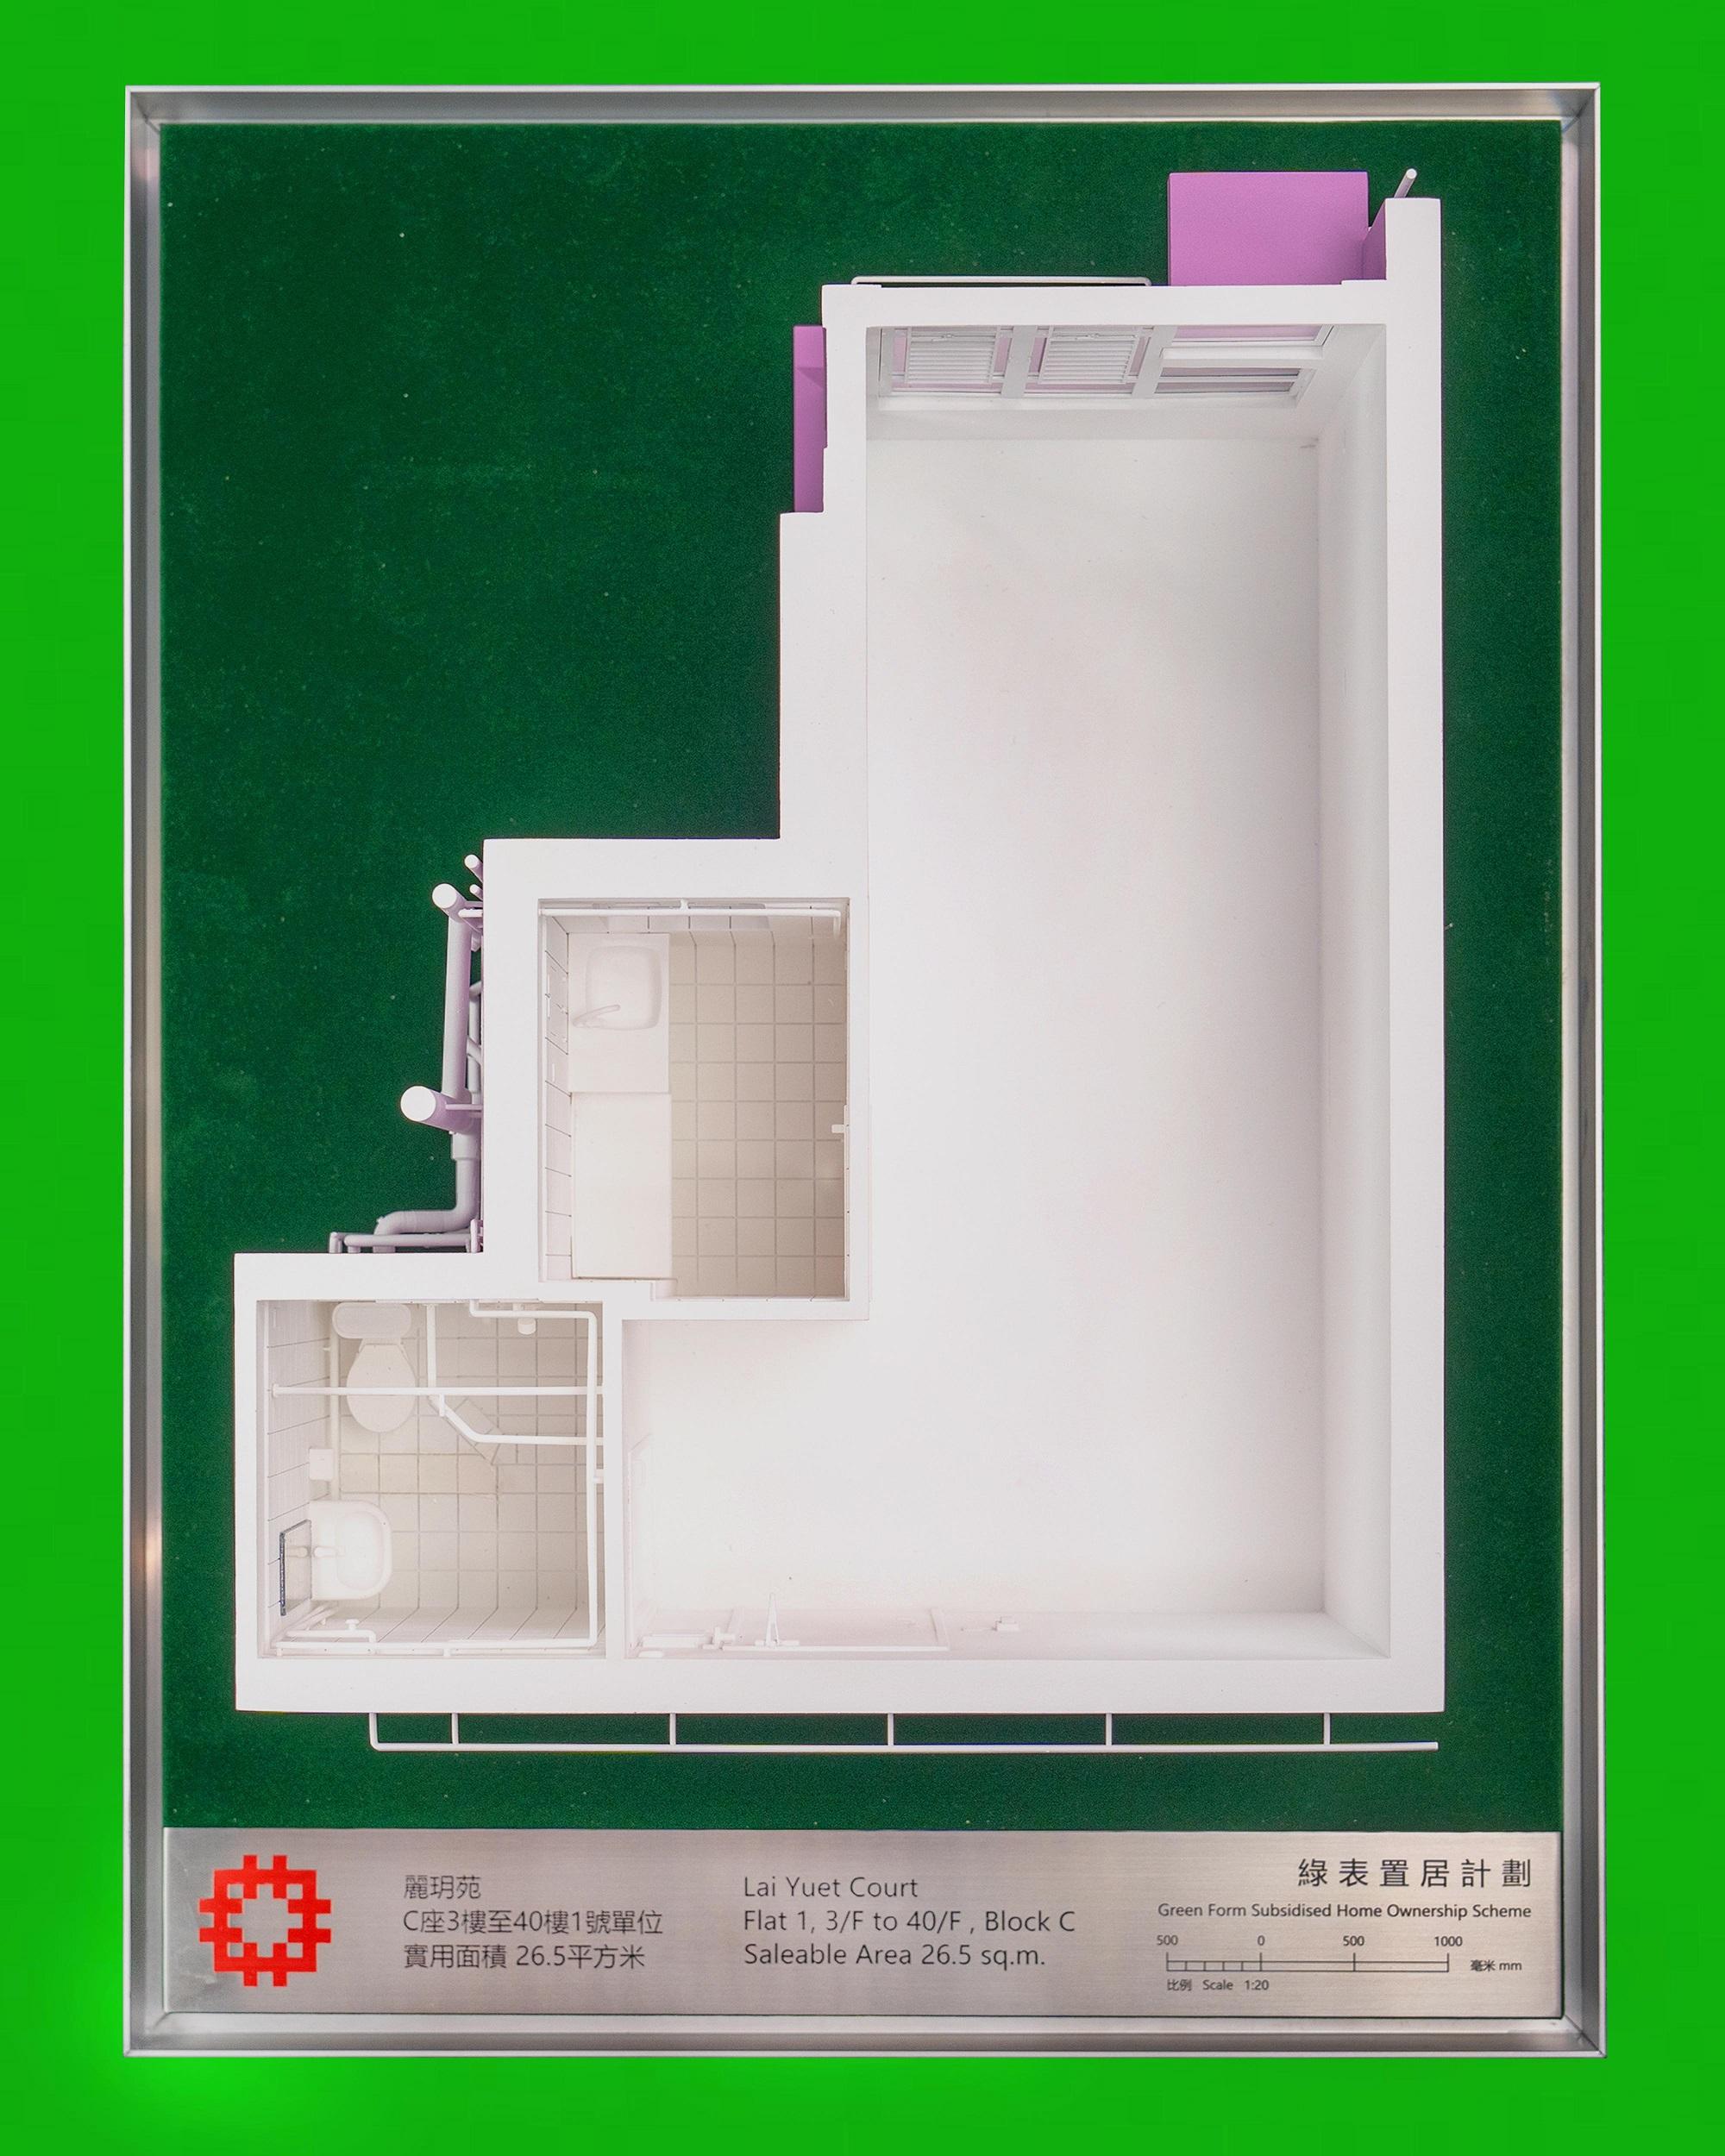 Application for Sale of Green Form Subsidised Home Ownership Scheme Flats 2023 will start on March 28. Photo shows a model of Flat 1, 3/F to 40/F, Block C, Lai Yuet Court, a new development under the scheme.